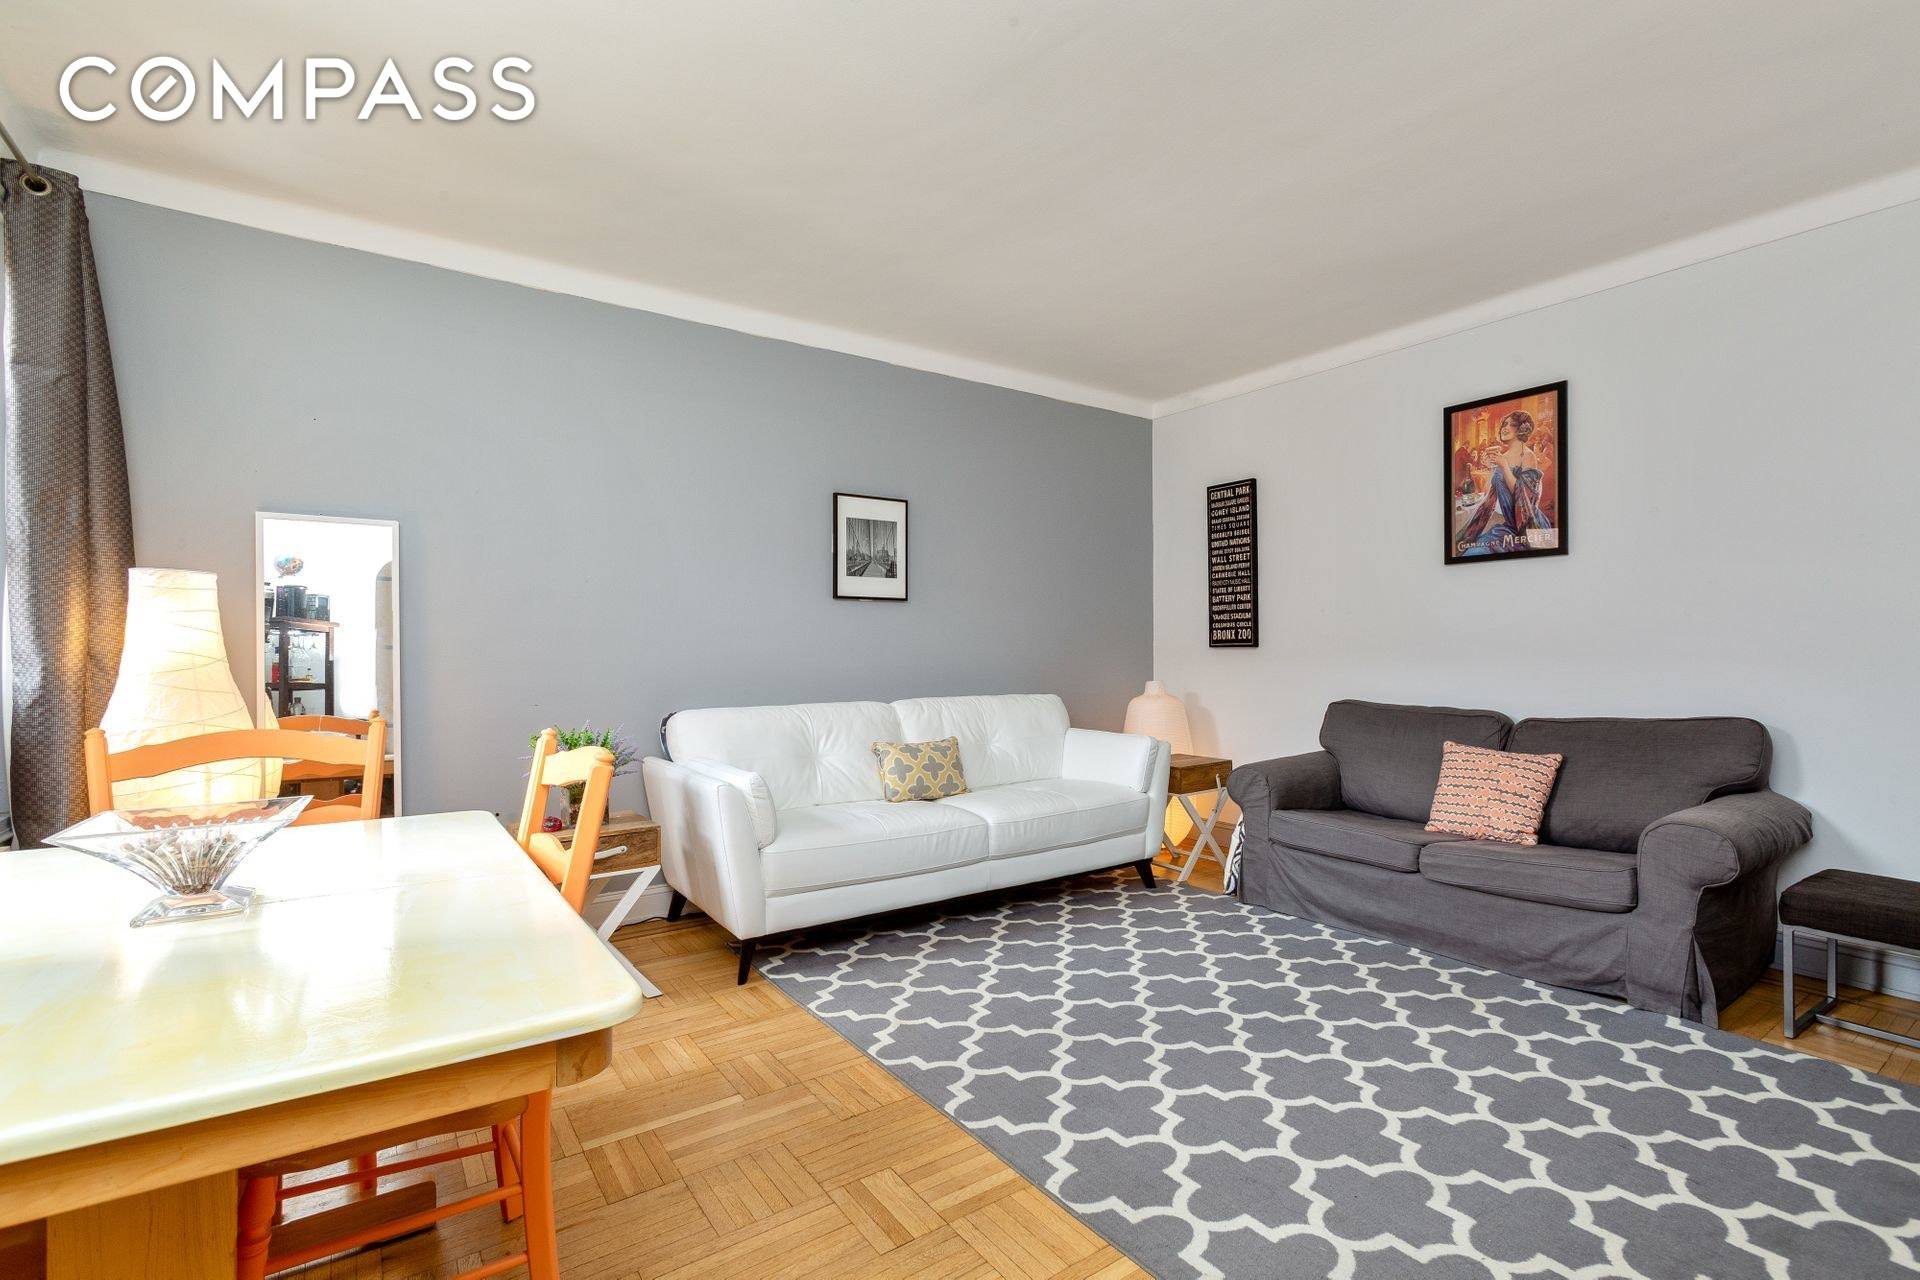 Gracious and spacious pre war 1 bedroom at the crossroads Kensington and Ditmas Park, steps to vibrant Cortelyou Road.